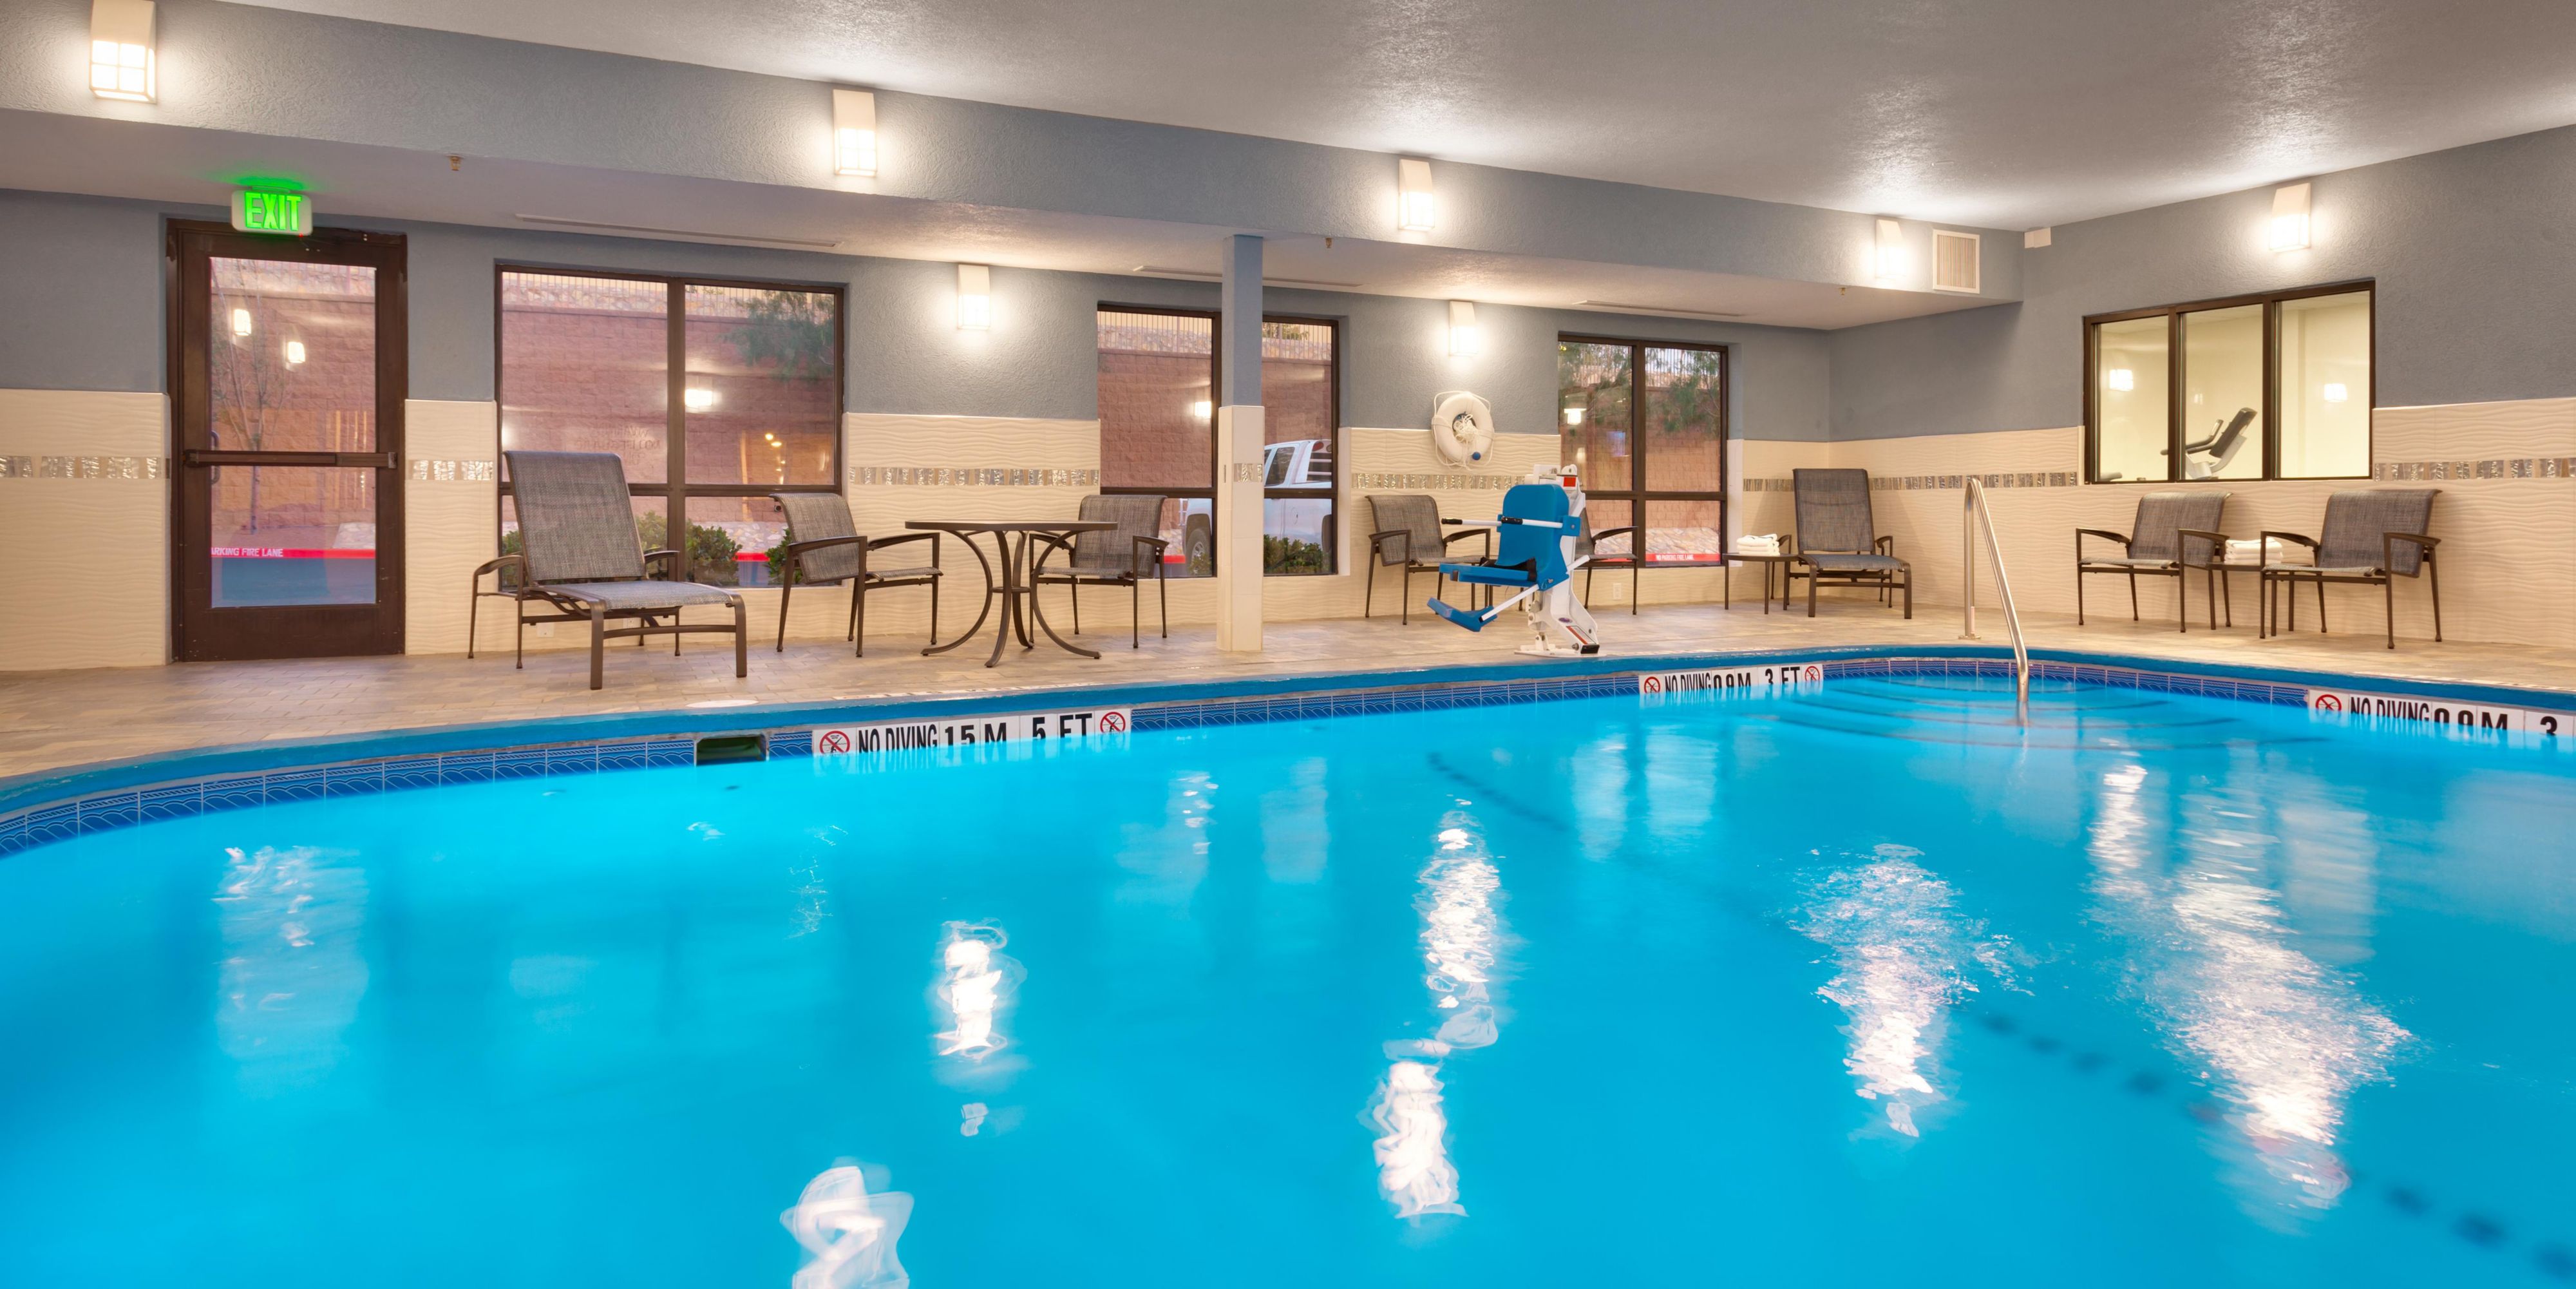 Whether you're in town for business or pleasure we encourage you to take some time to relax and enjoy our sparkling indoor pool and spa.